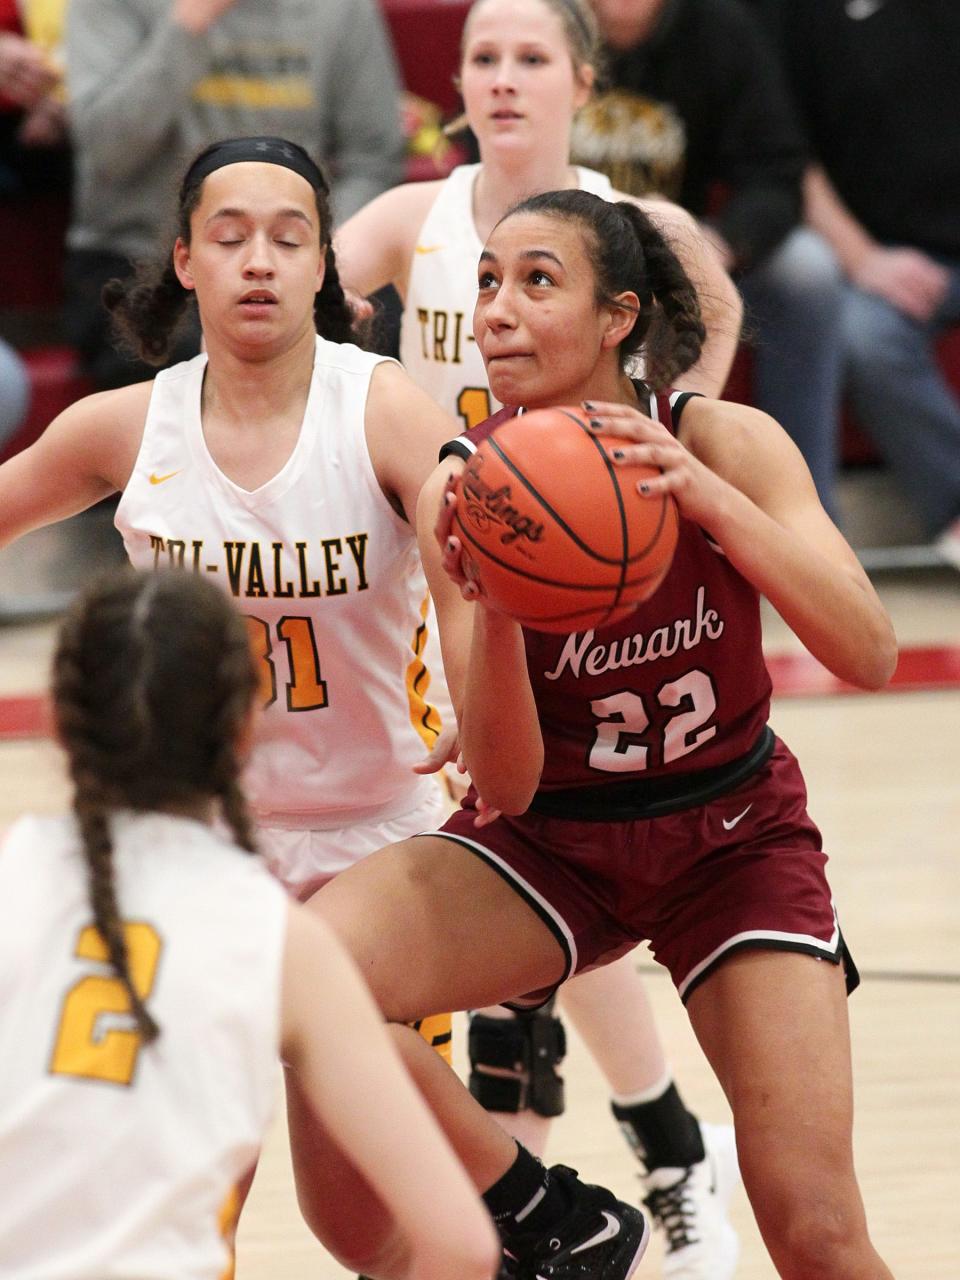 Newark's Jenna Shackleford looks to score between Tri-Valley defenders MacKenzie Harvey (31) and P.D. Moore (2) on Wednesday, Feb. 22, 2023 at Johnstown.